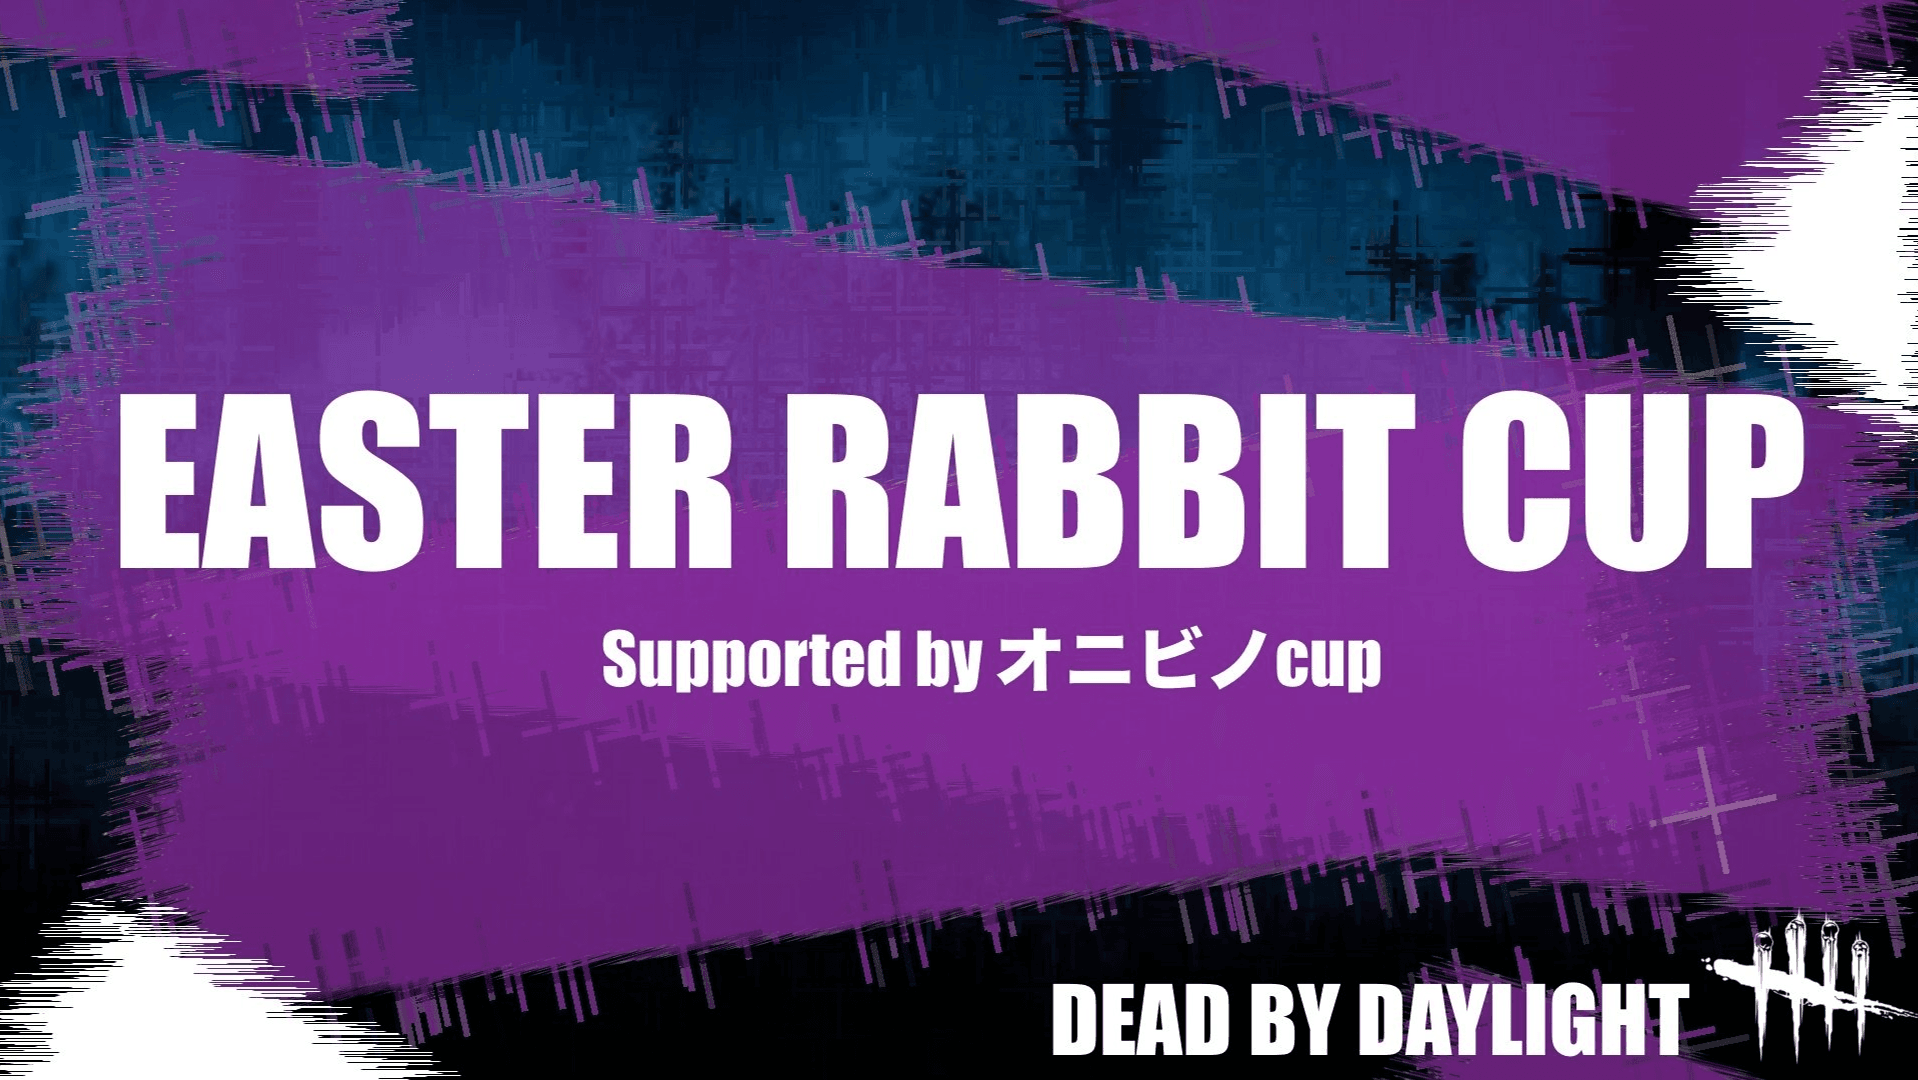 Easter Rabbit cup feature image